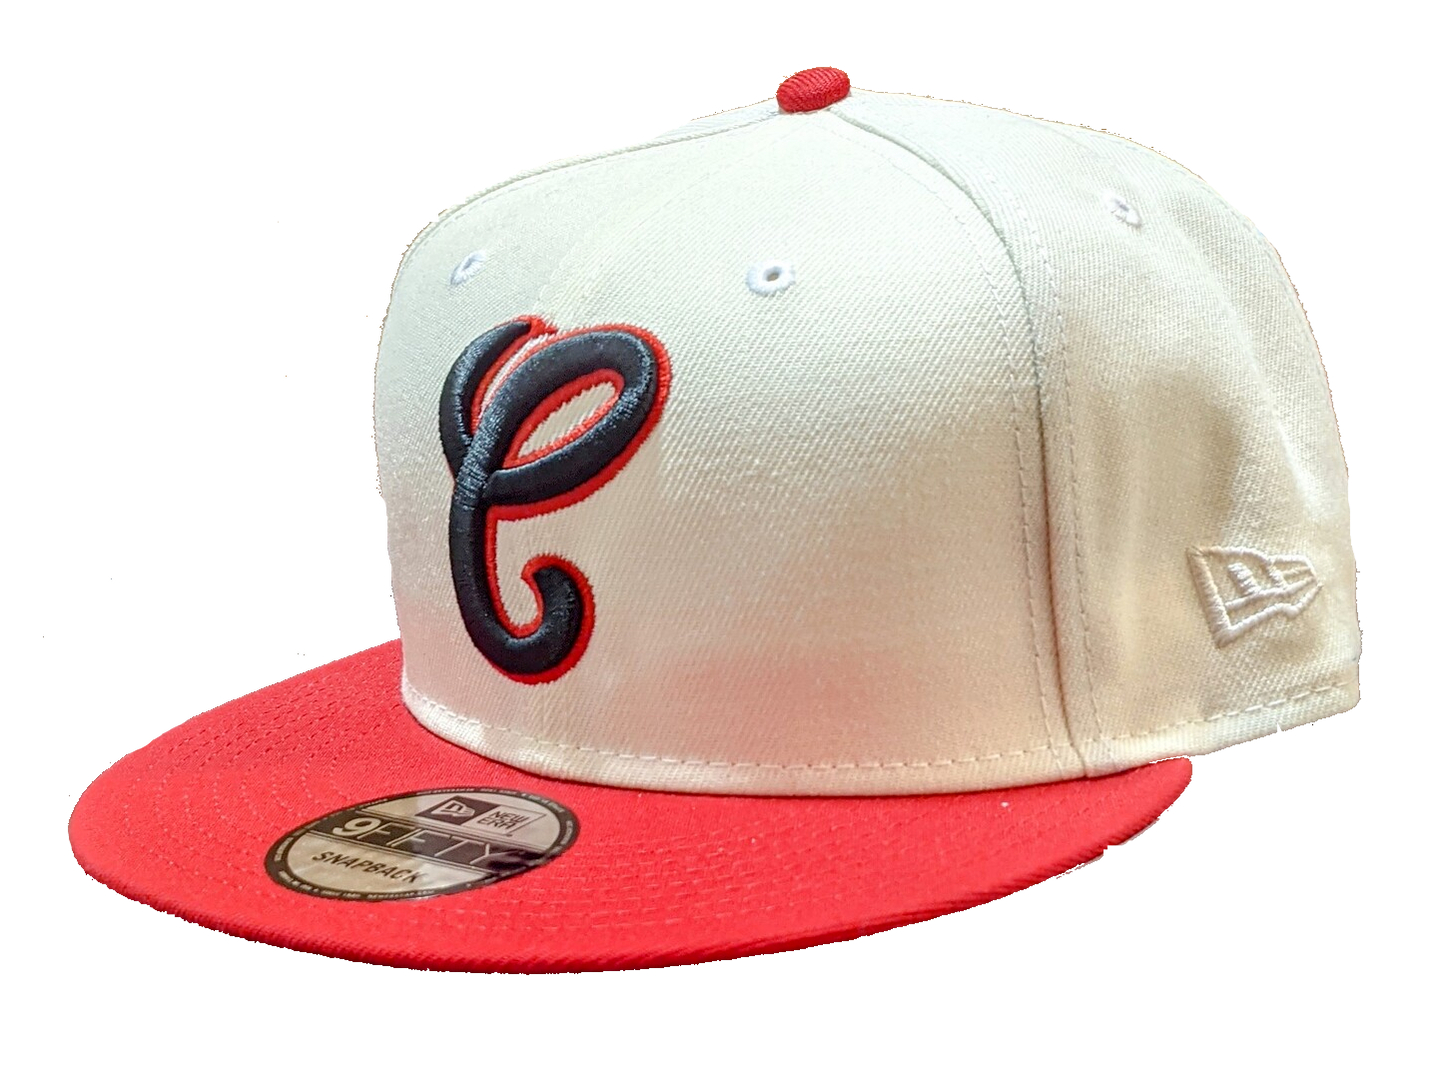 Mens Chicago White Sox New Era 1987 Cream & Red Cooperstown Collection 9FIFTY Snapback Hat